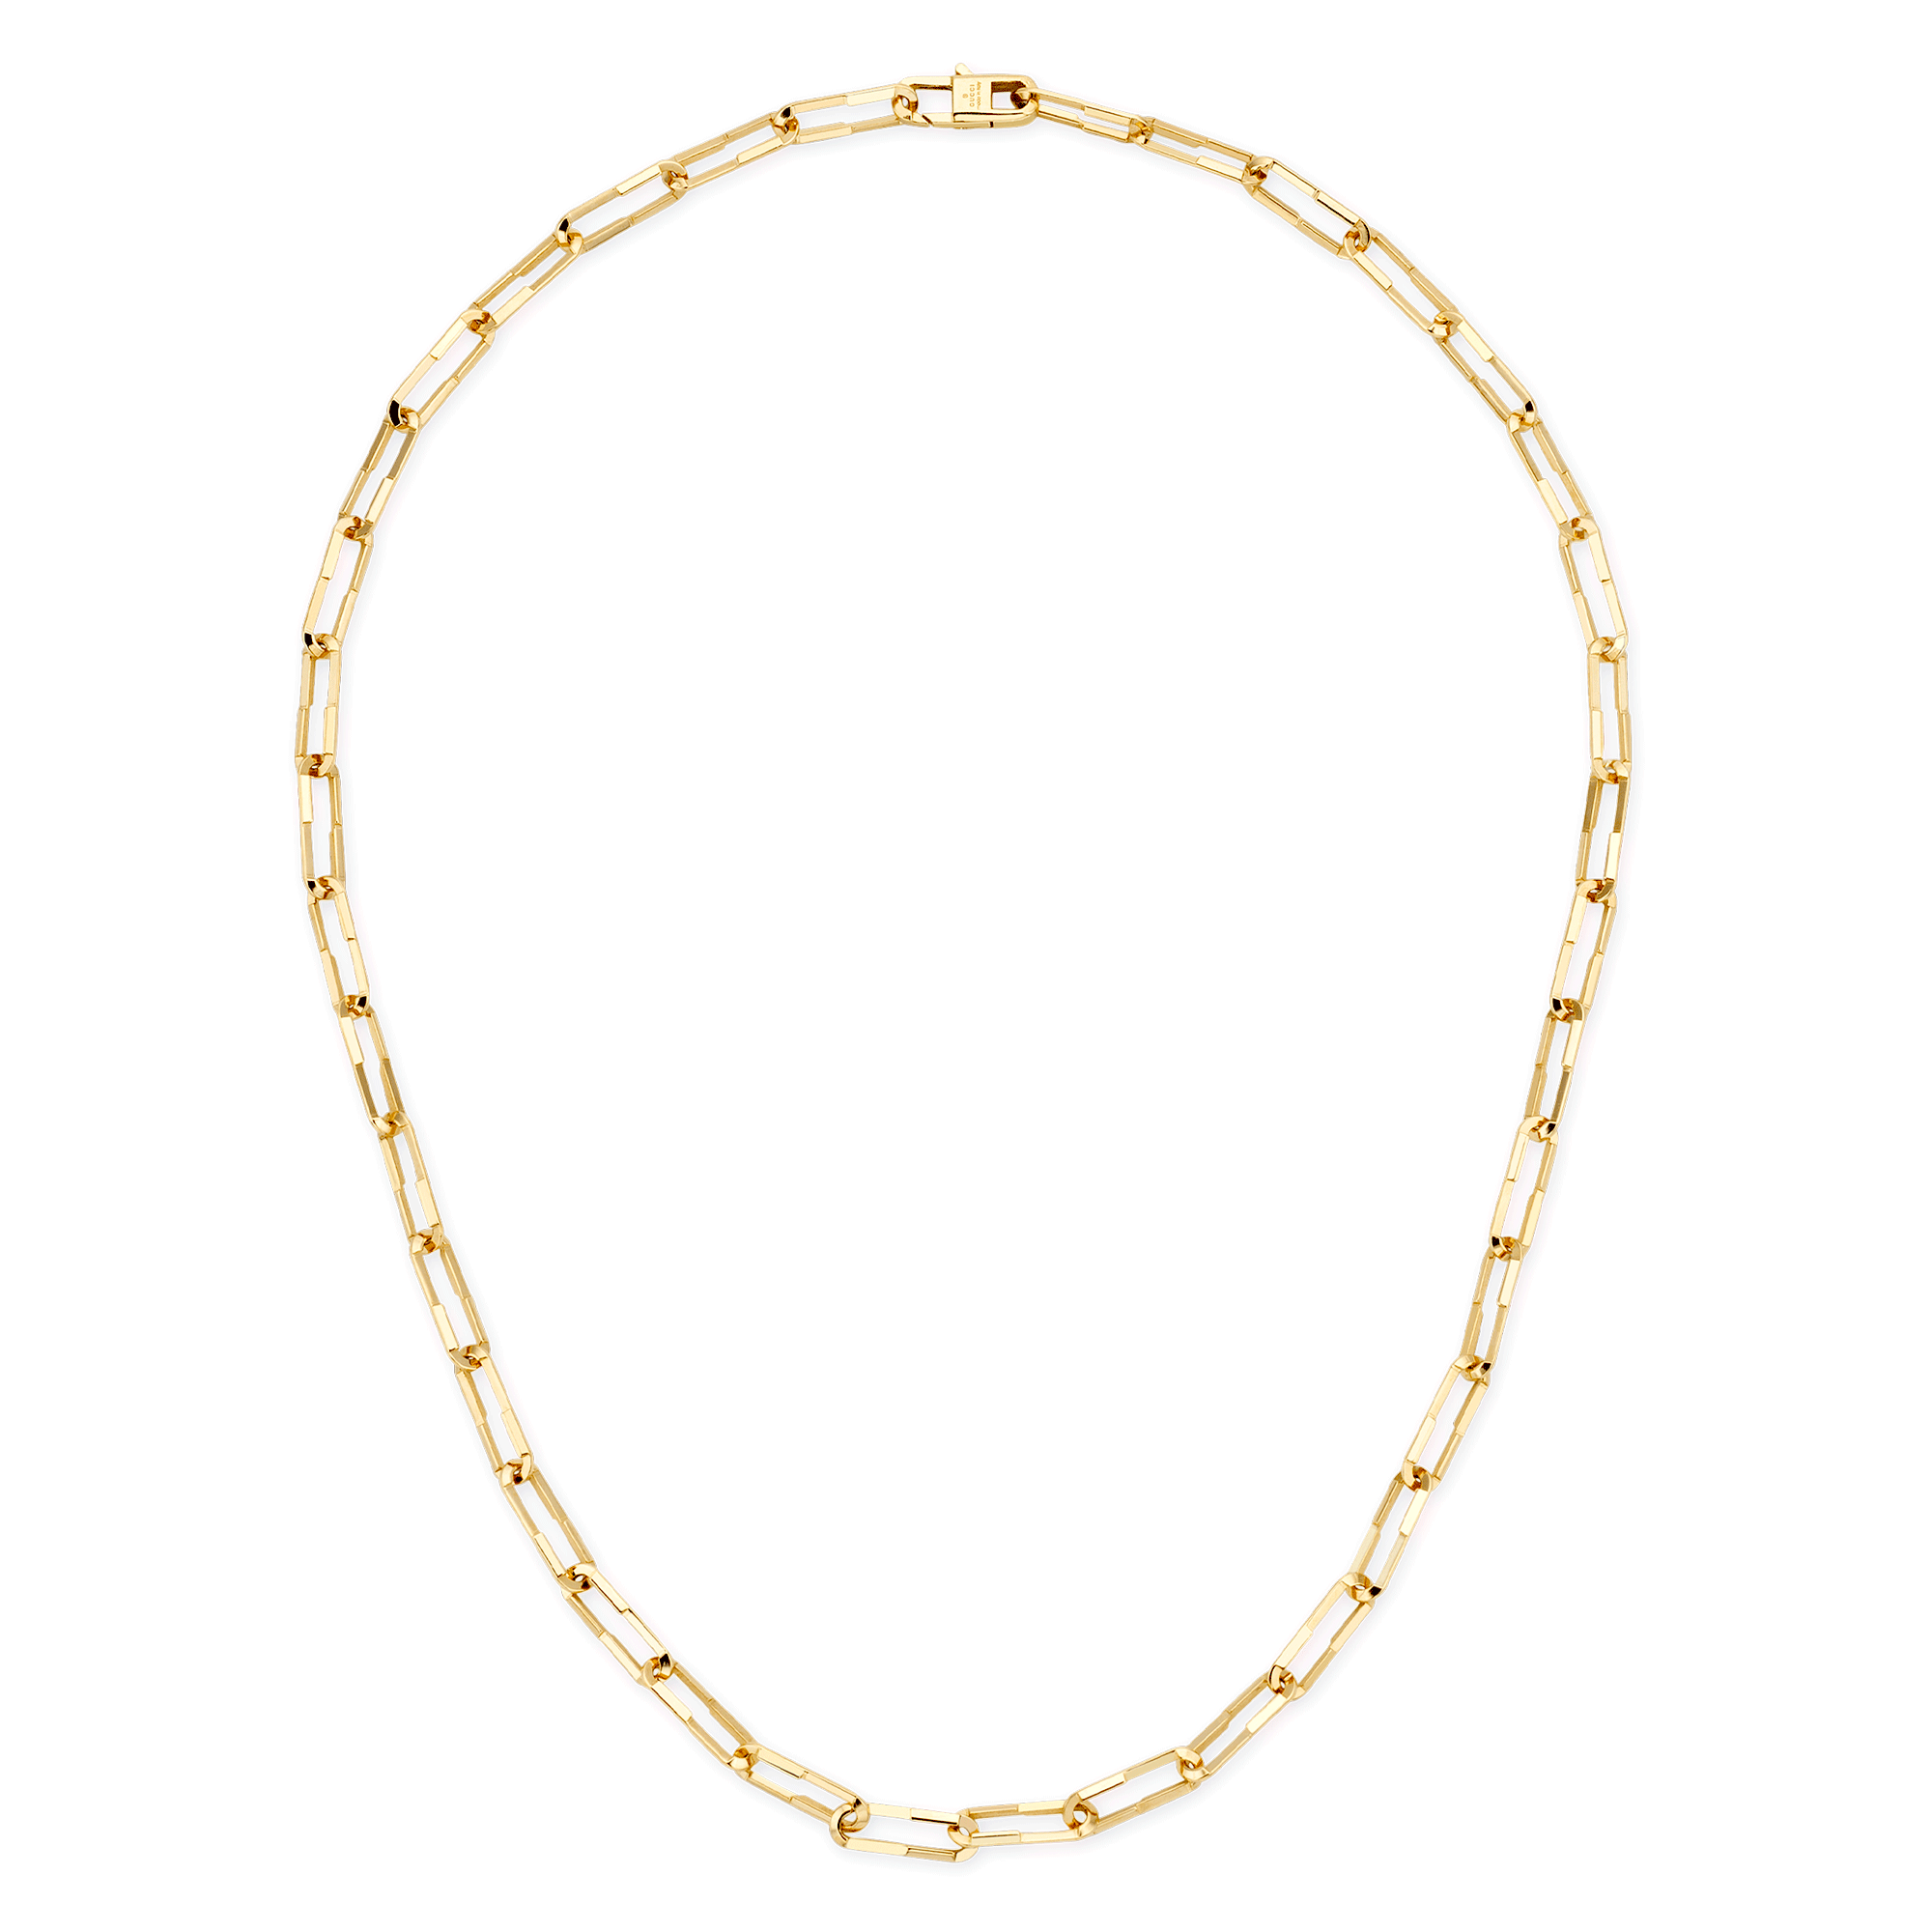 Link to Love 18ct Yellow Gold Paperchain Necklace